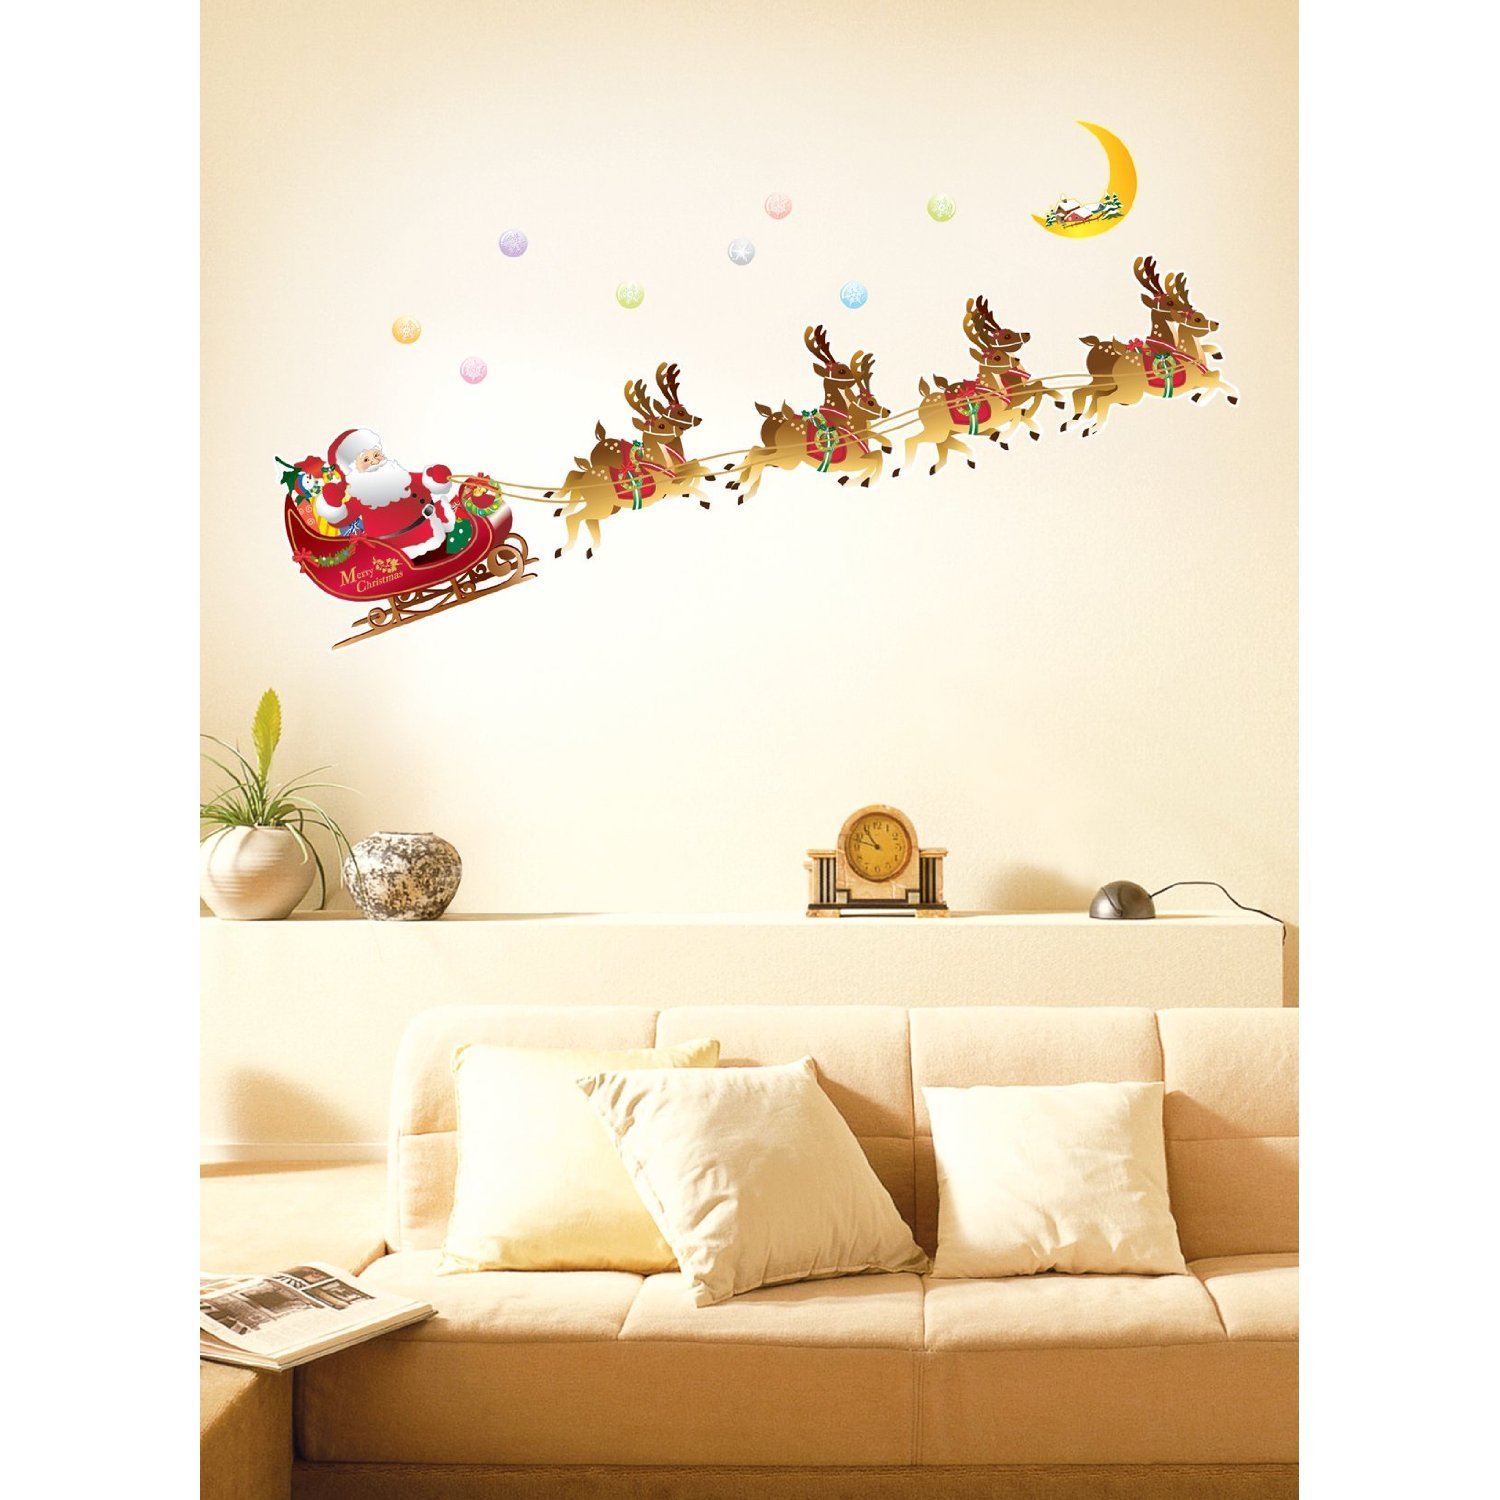 Christmas Wall Decorations Ideas for This Year